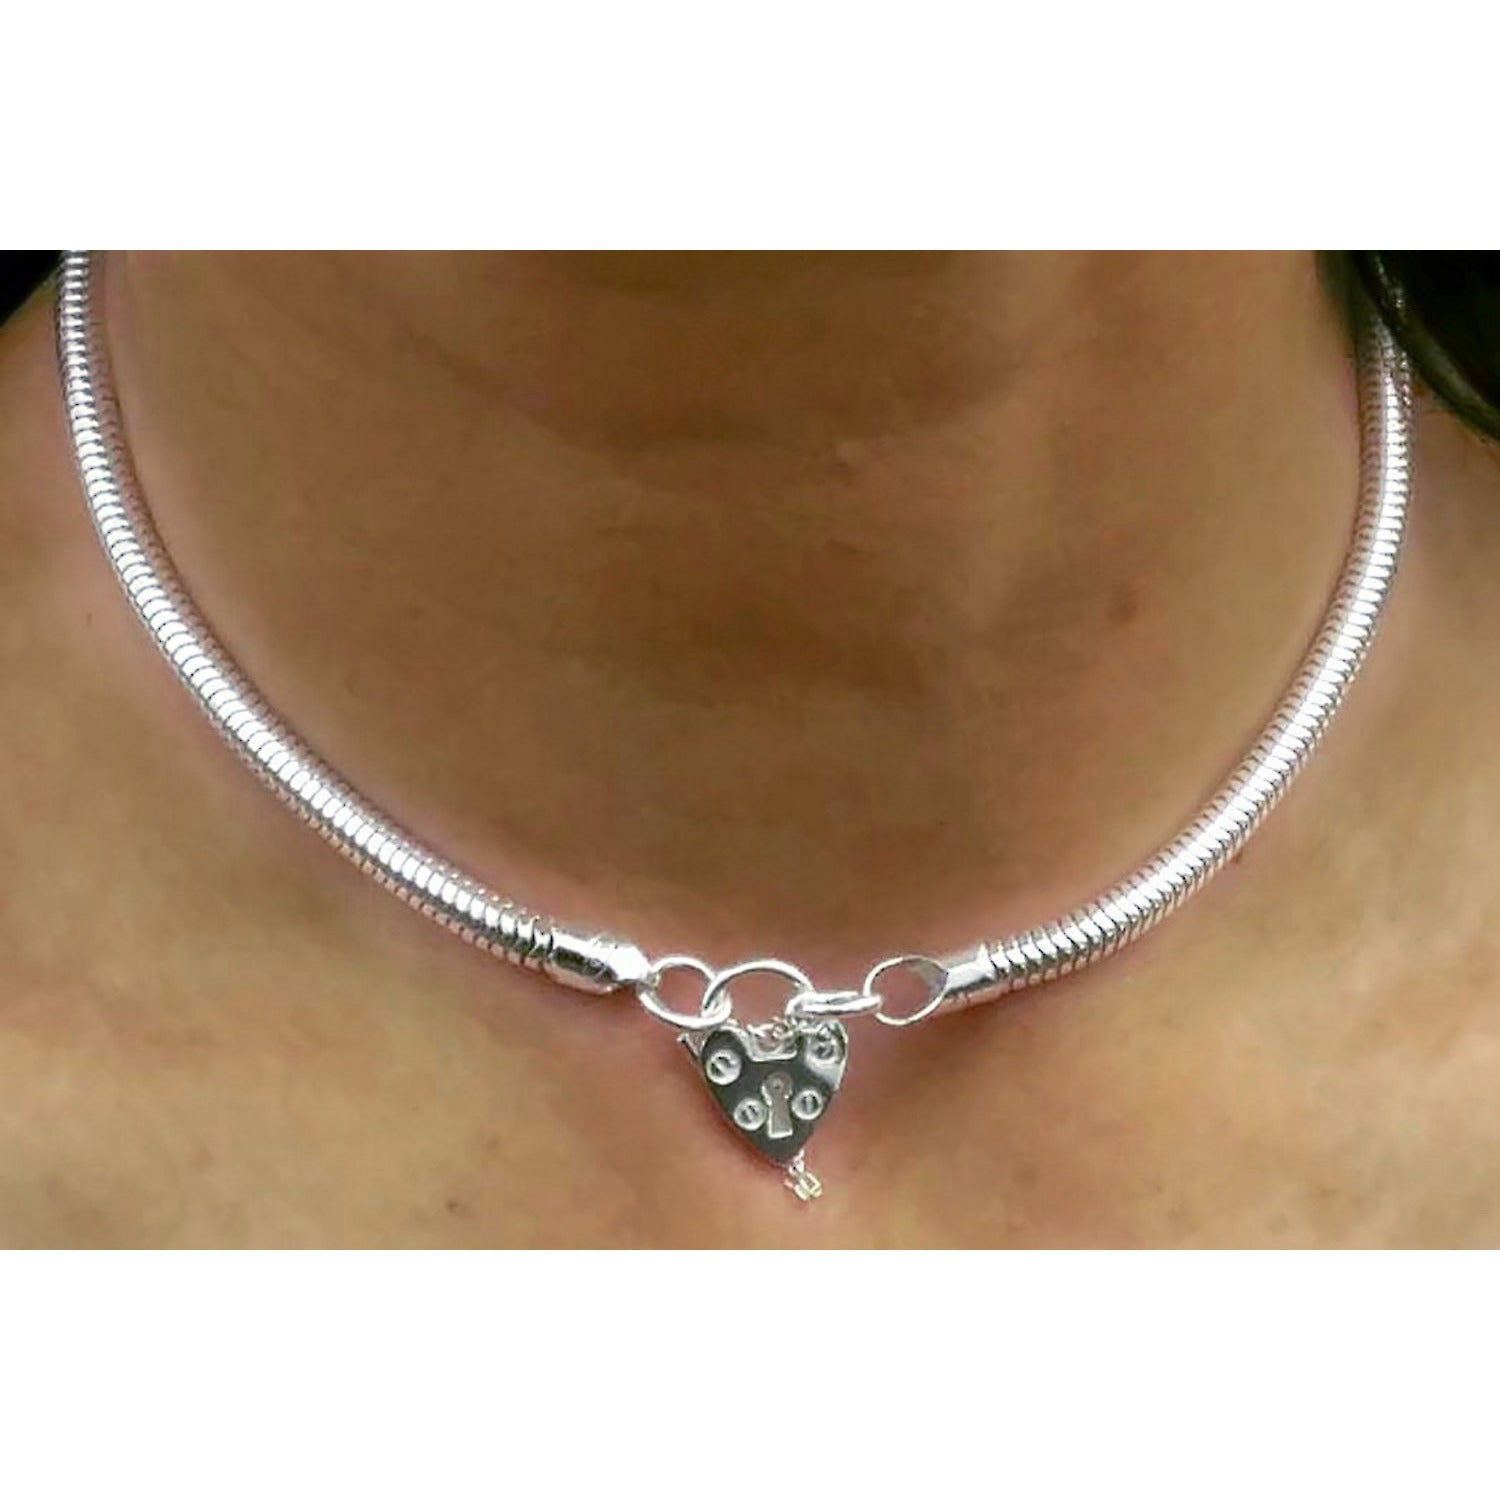 Sterling Silver Discreet Day Collar, 5mm thick, Snake Chain, Vintage shaped Heart Padlock clasp,  Handmade BDSM Collar